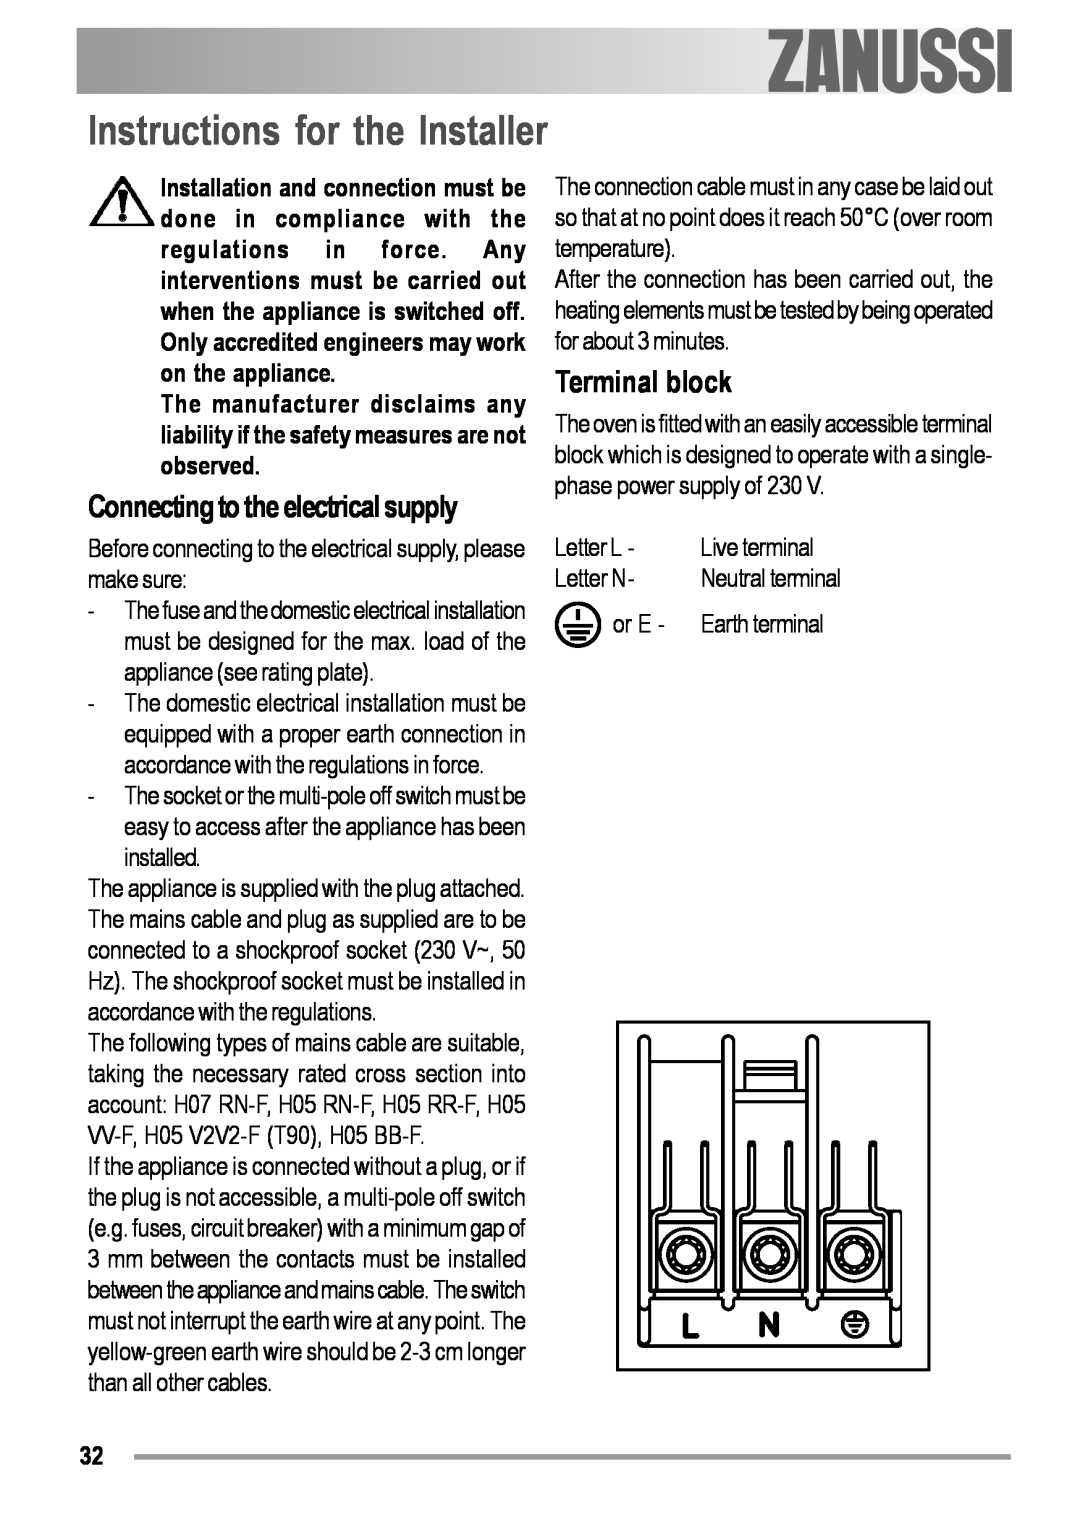 Zanussi ZOB 594 manual Instructions for the Installer, Terminal block, Connecting to the electrical supply 